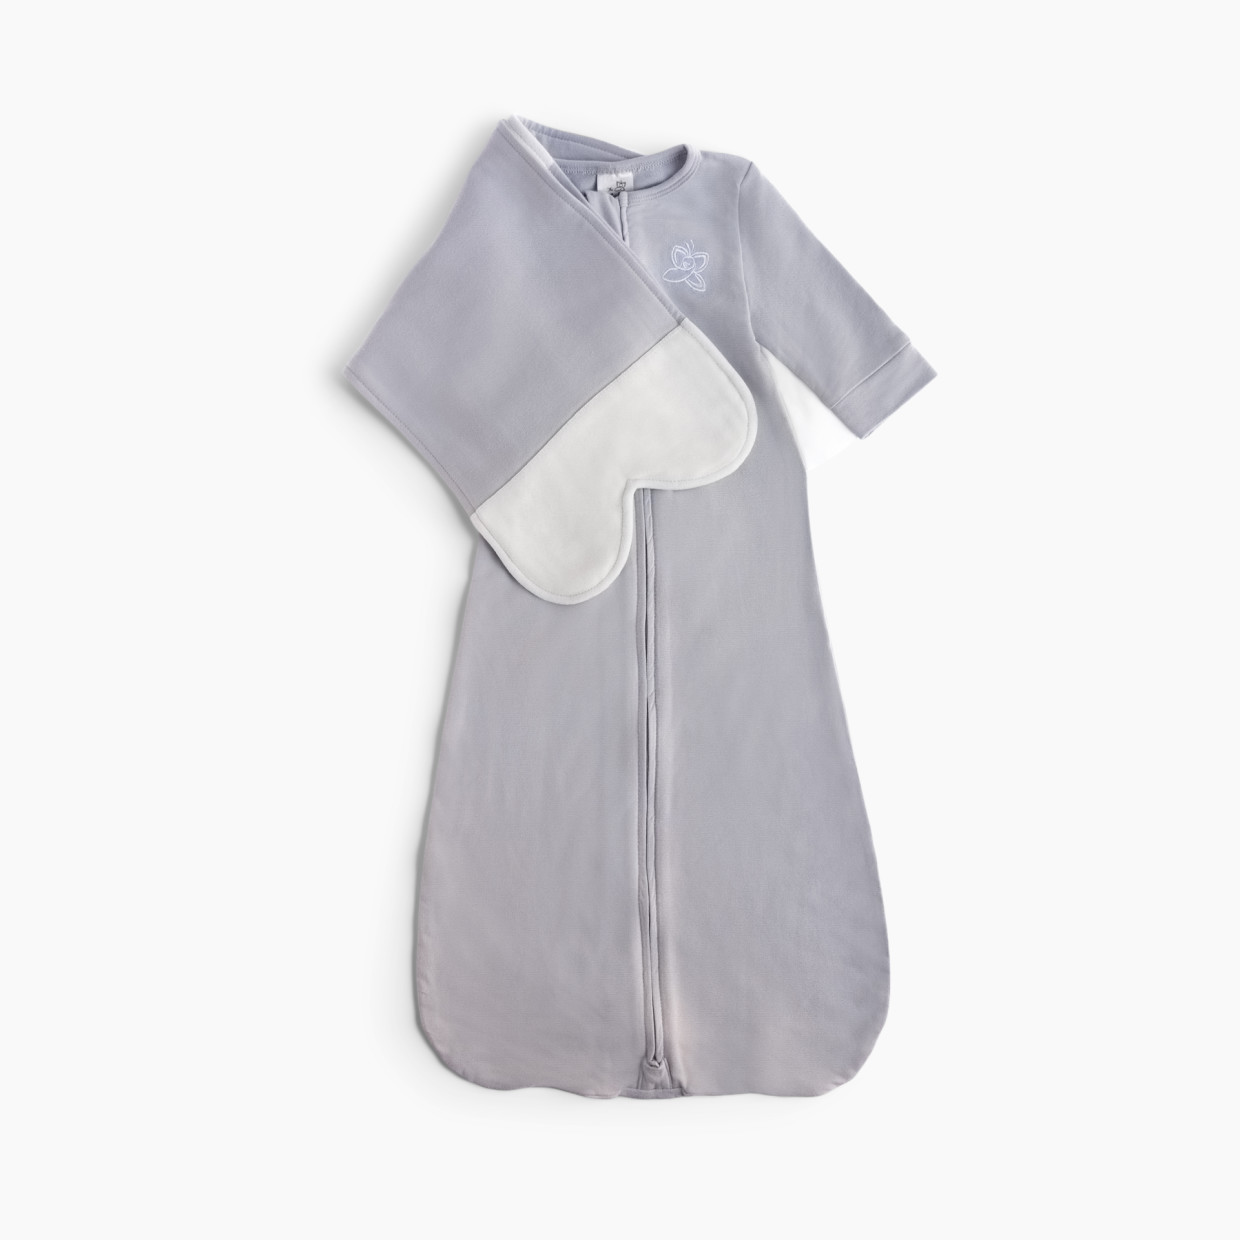 The Butterfly Swaddle Swaddle and Transitional Sleep Sack in One - Cool Gray, Med/Large (12 -17 Lbs).